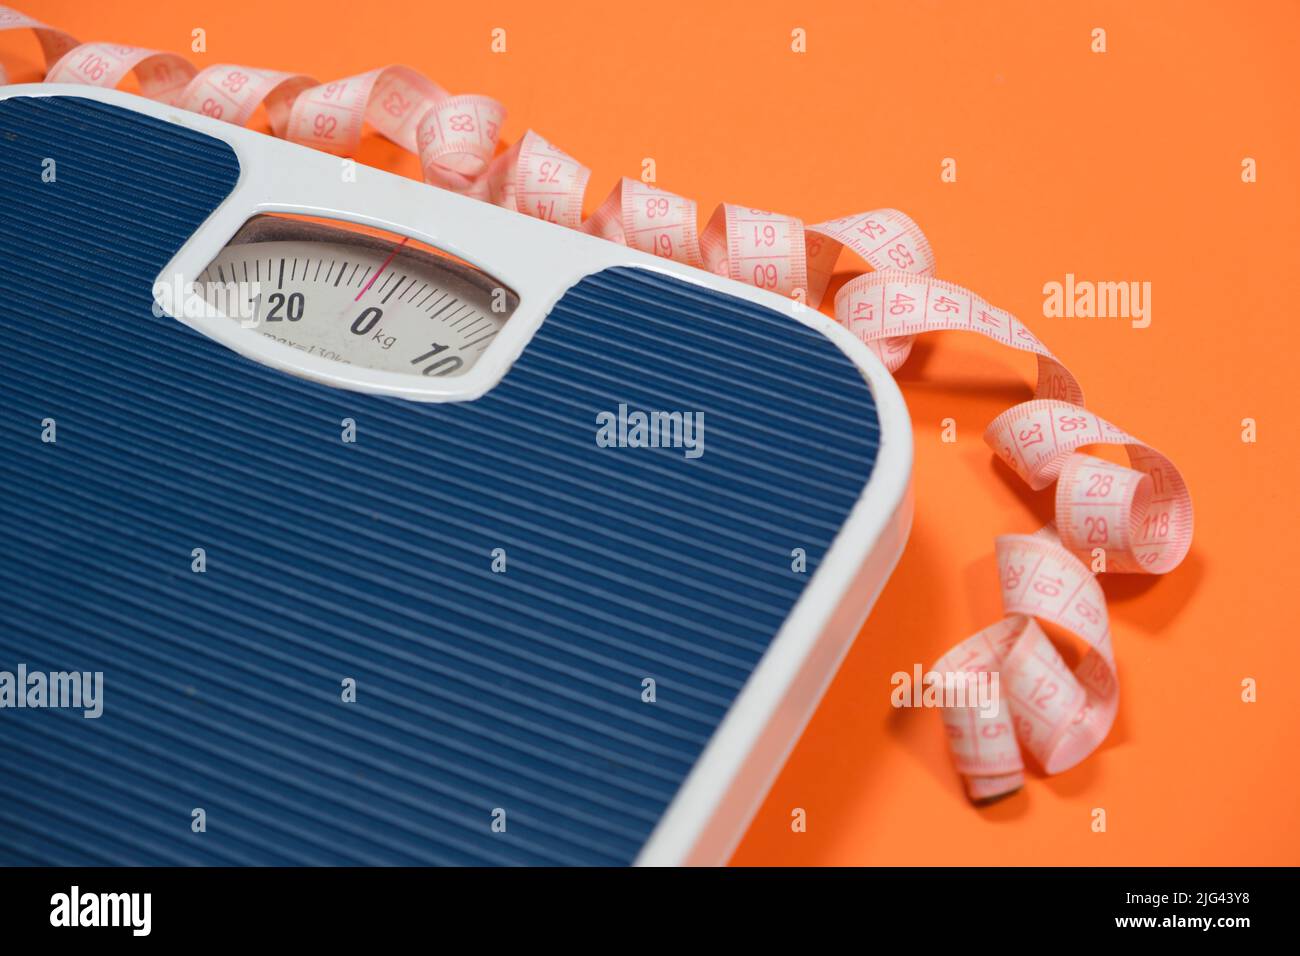 https://c8.alamy.com/comp/2JG43Y8/floor-blue-scales-and-centimeter-measuring-tape-on-an-orange-background-top-view-the-concept-of-weight-loss-and-weight-control-2JG43Y8.jpg